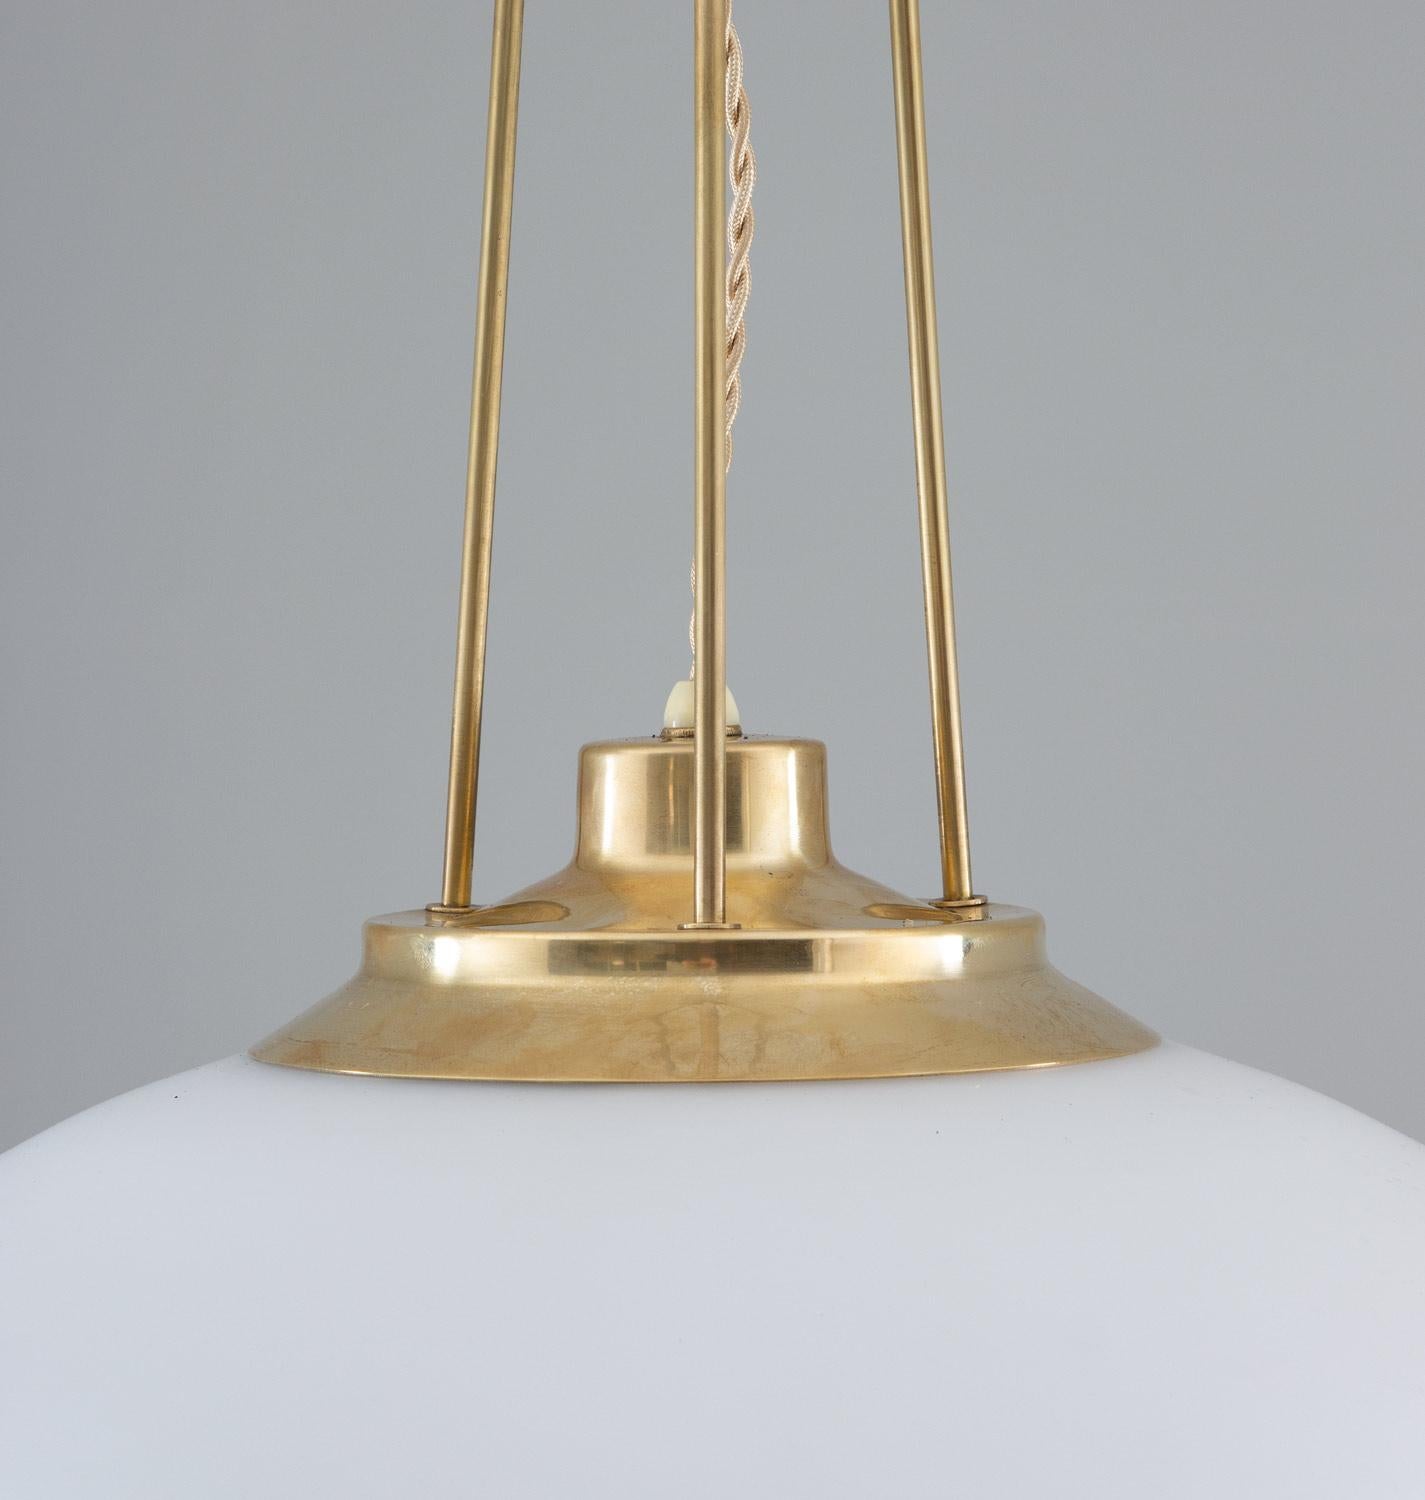 Swedish Midcentury Pendant in Brass and Glass by Hans Bergström for ASEA 1